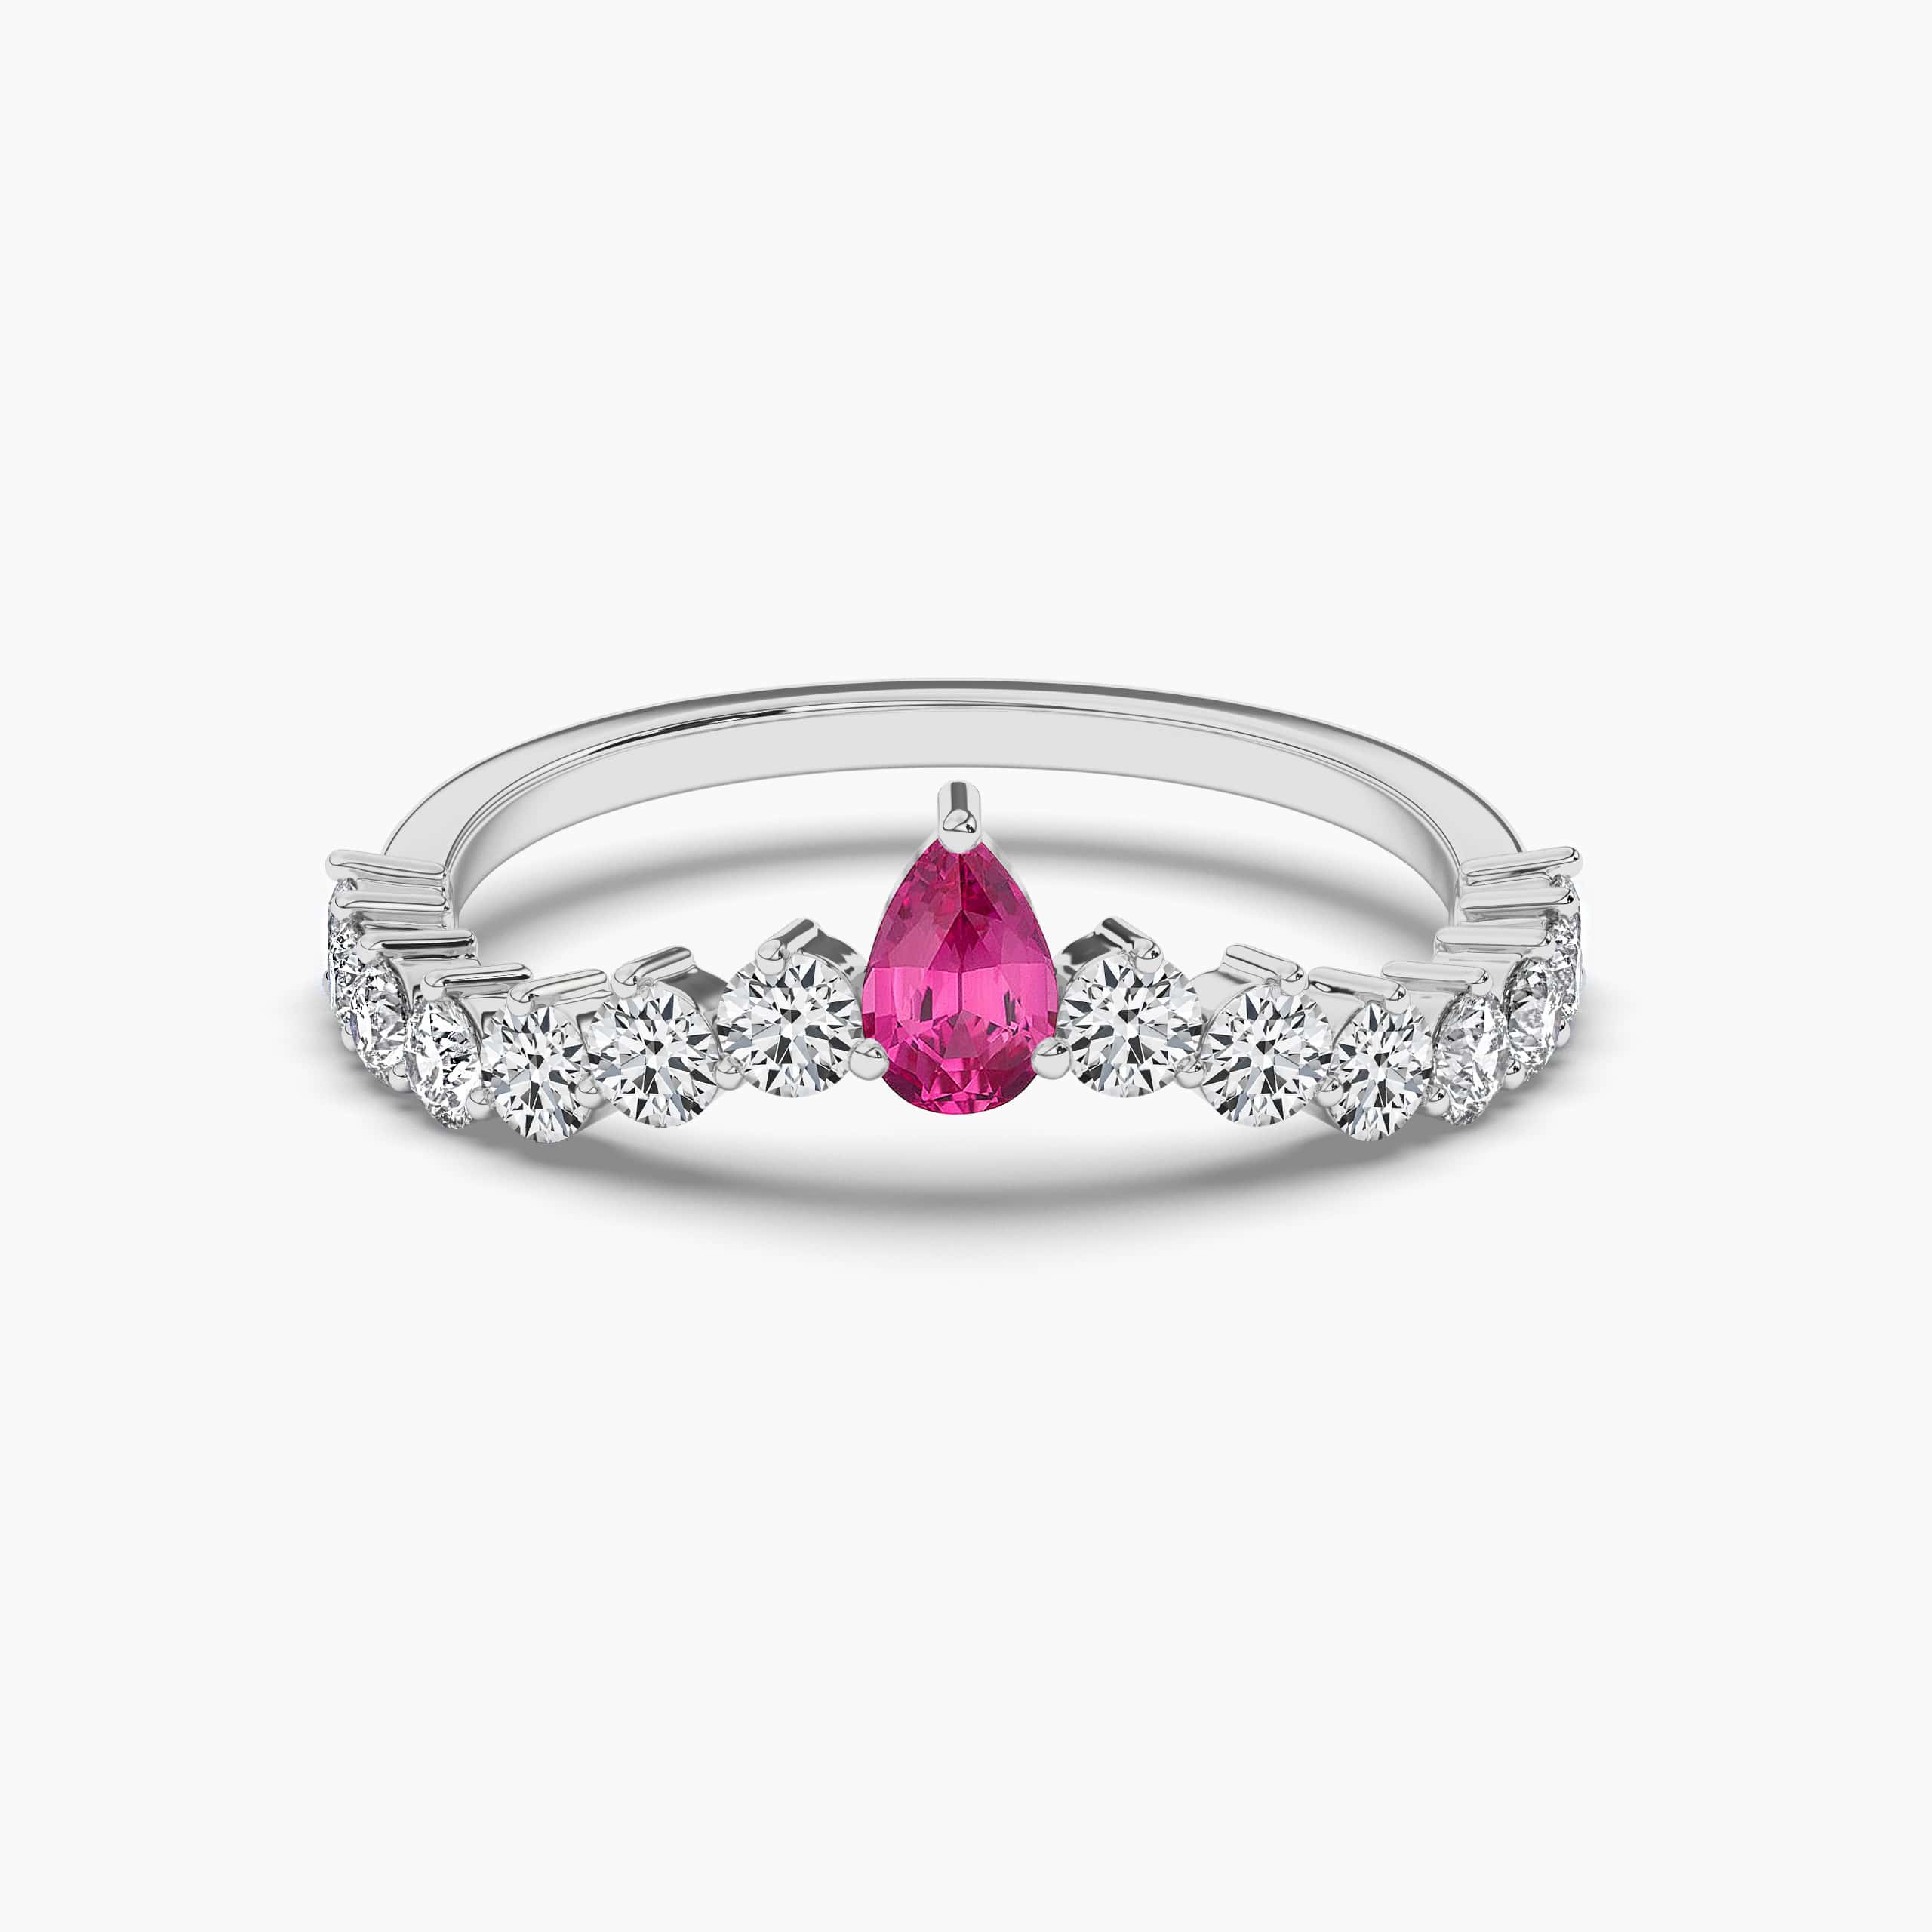 PINK PEAR CUT OPALESCENT SAPPHIRE RING